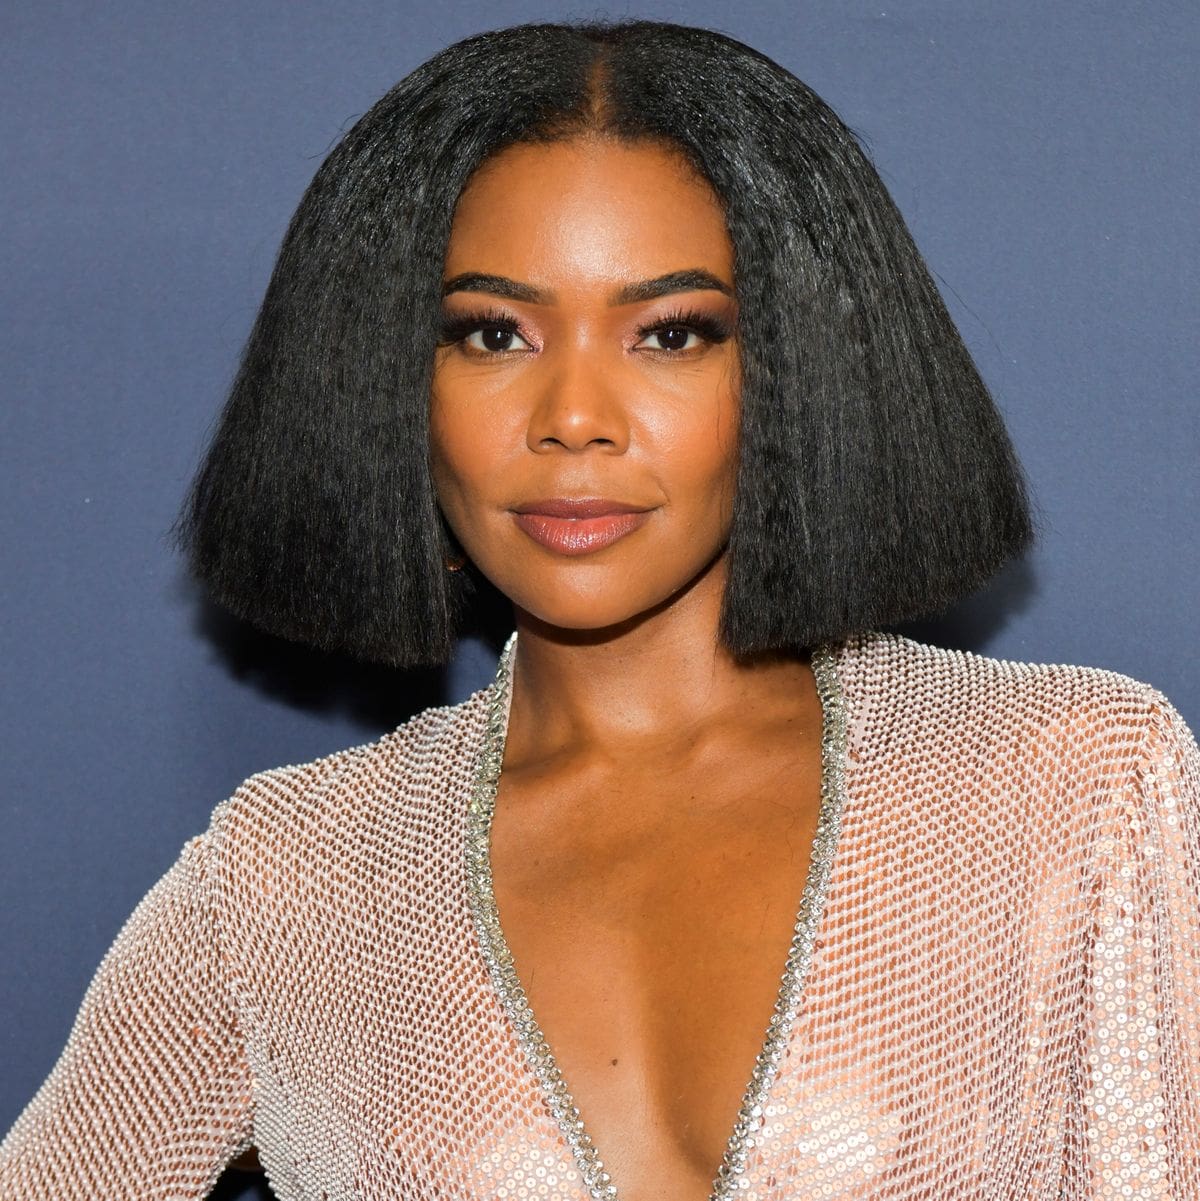 Gabrielle Union Shares New Video Featuring Her 'Shady Baby' And Has Fans In Awe